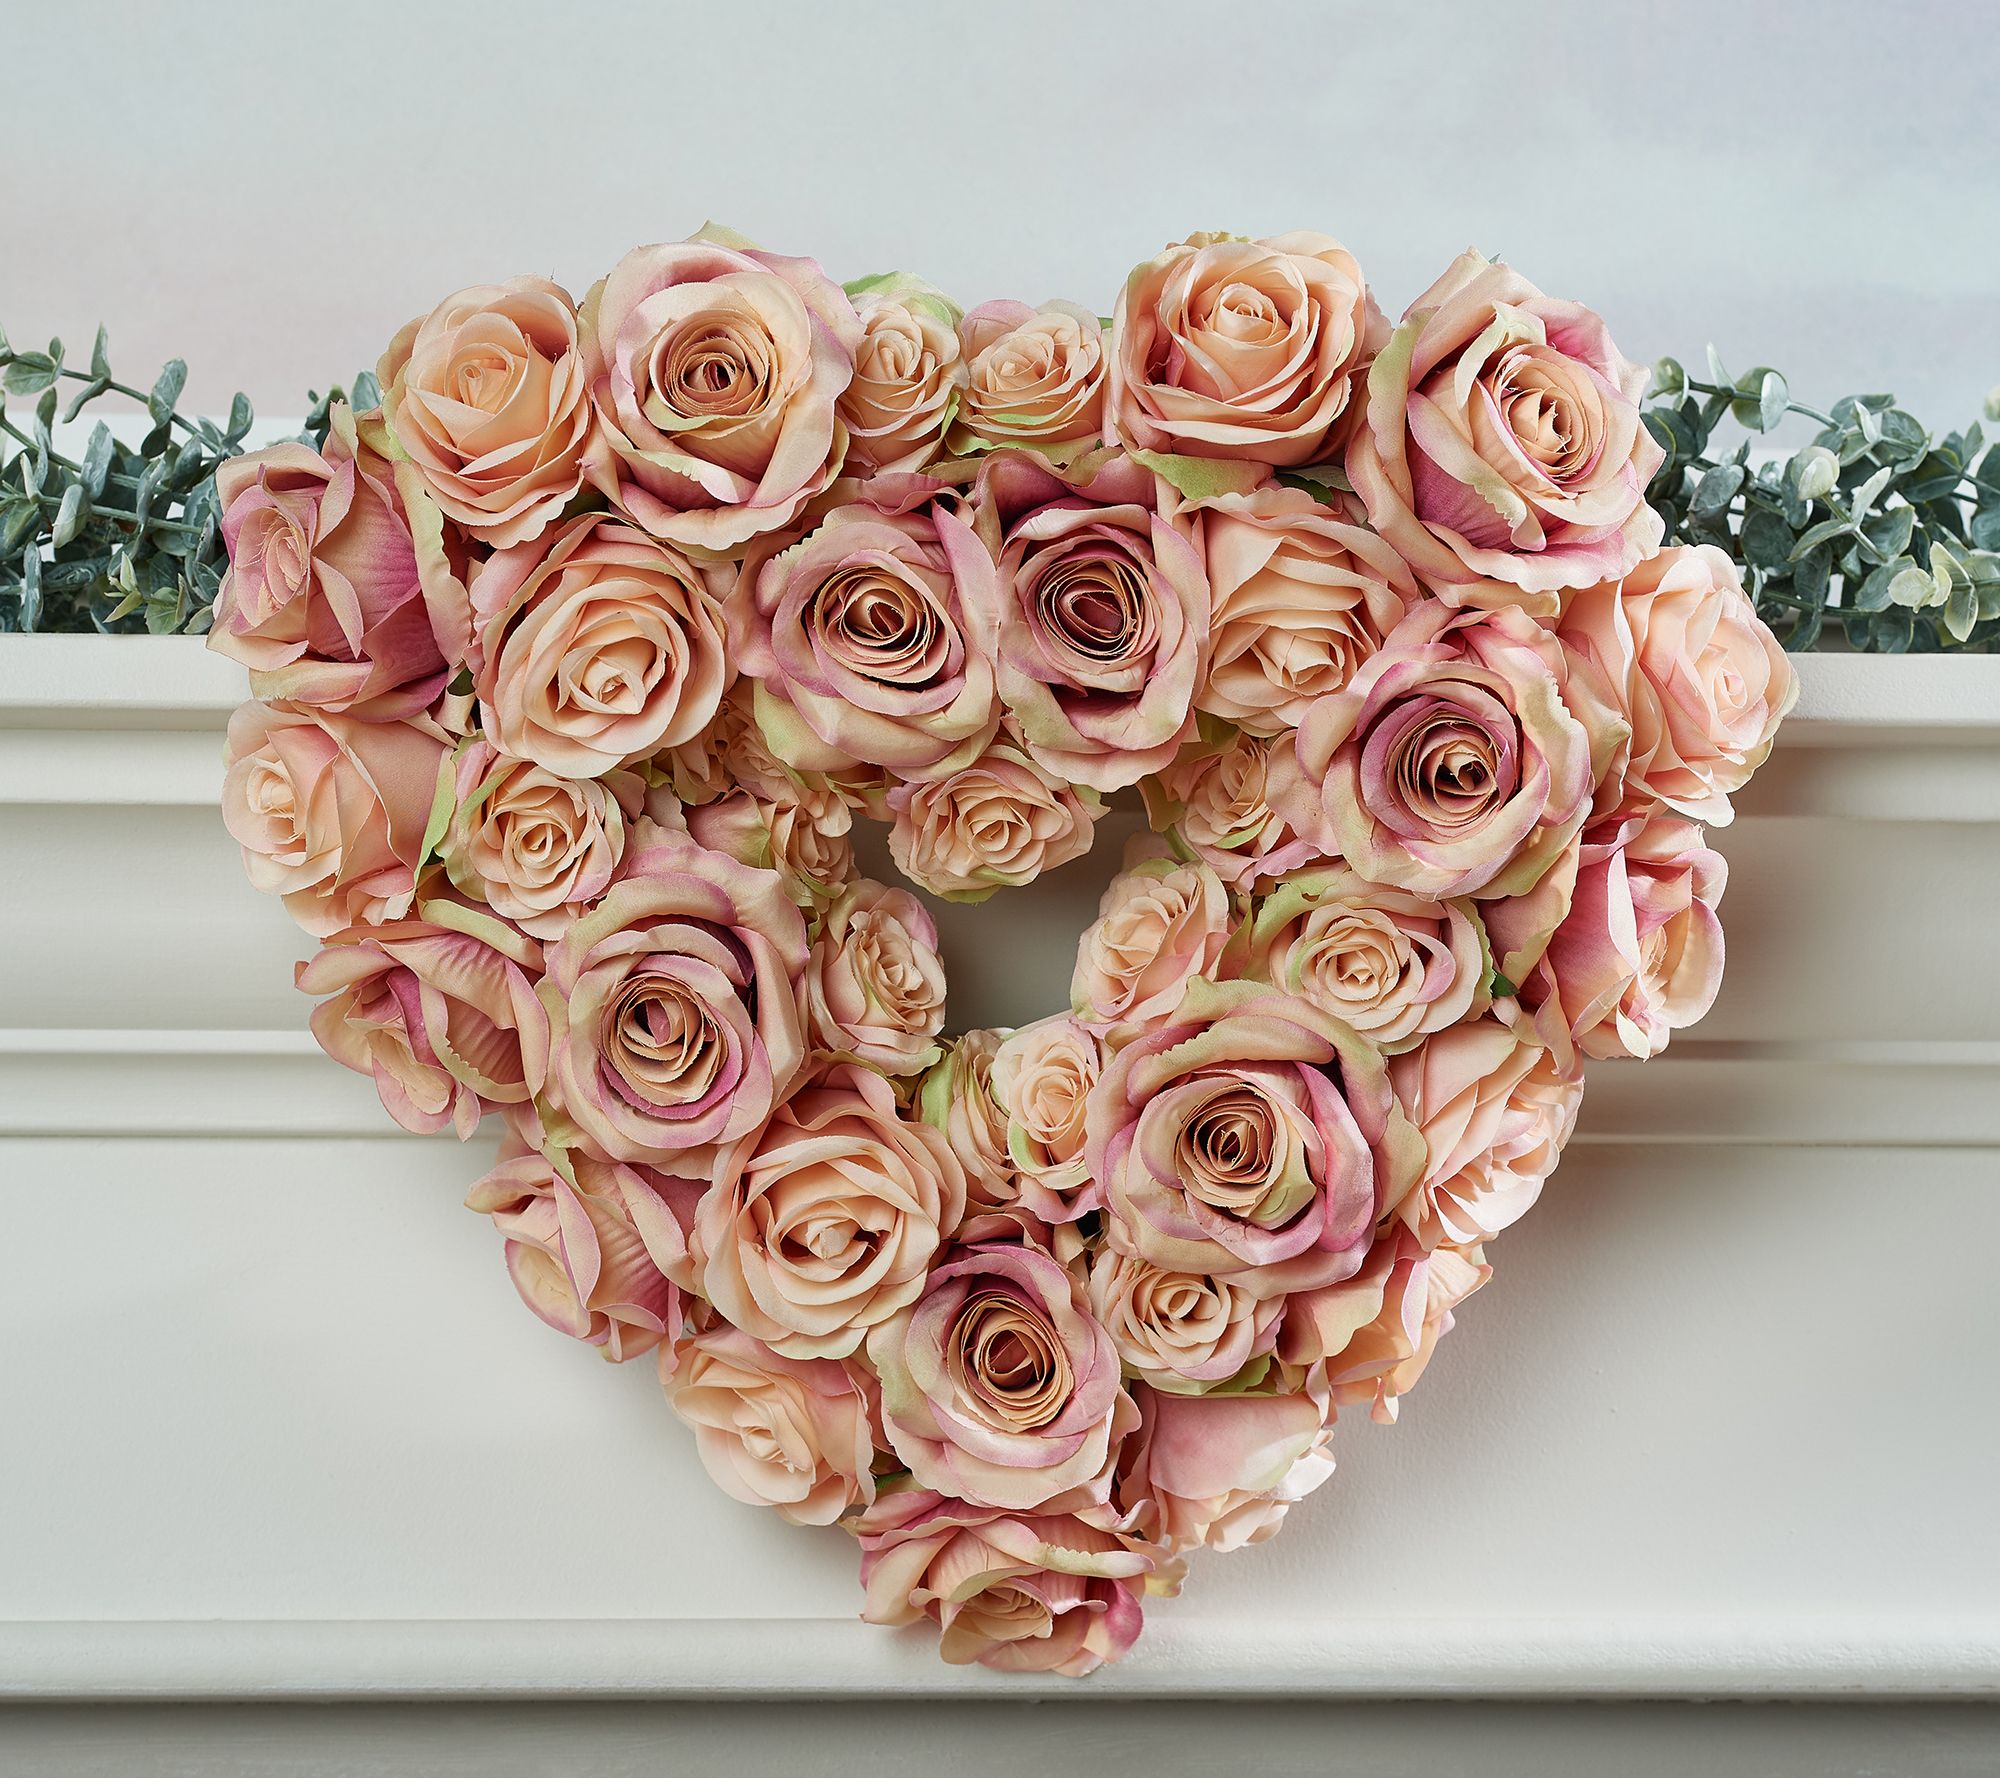 14 Vintage Rose Heart-Shaped Wreath by Valerie